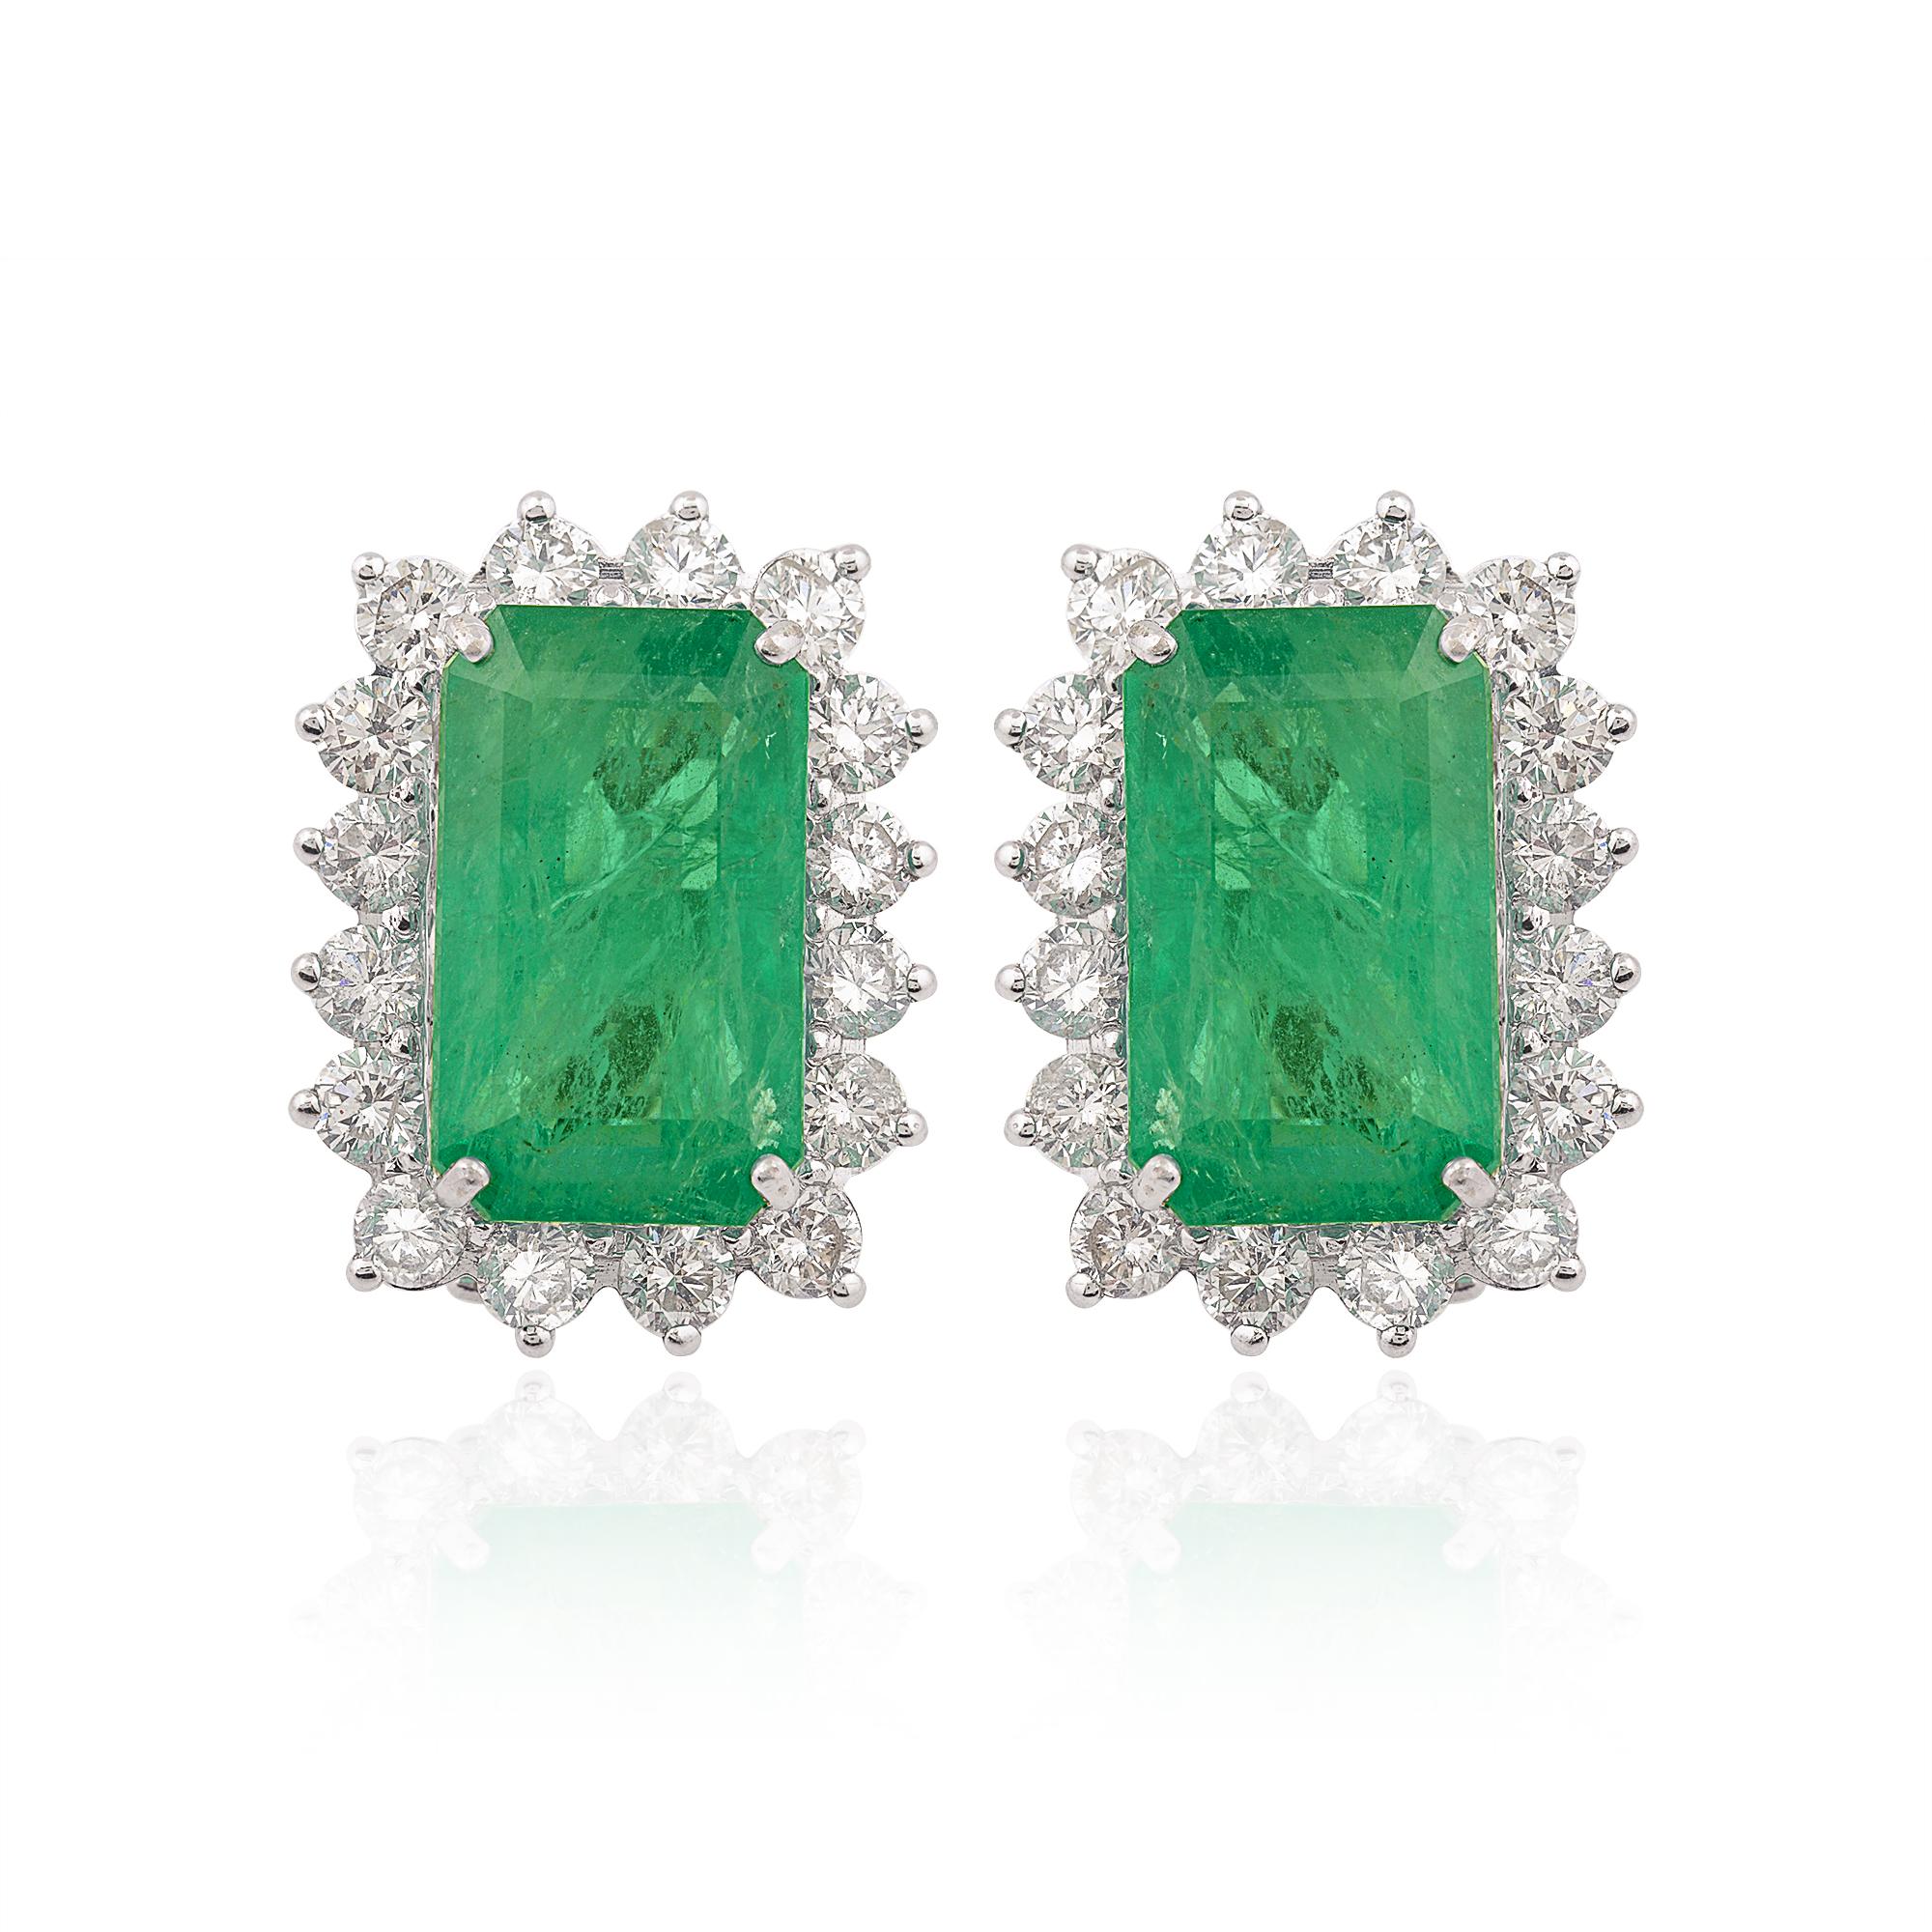 Item Code:- SEE-1995 (14k)
Gross Weight :- 10.69 gm
14k Solid White Gold Wt :- 7.15 gm
Natural Diamond Wt :- 2.91 ct. ( AVERAGE DIAMOND CLARITY SI1-SI2 & COLOR H-I )
Zambian Emerald Weight :- 14.78 gm
Earring Size :- 20 mm Approx

✦